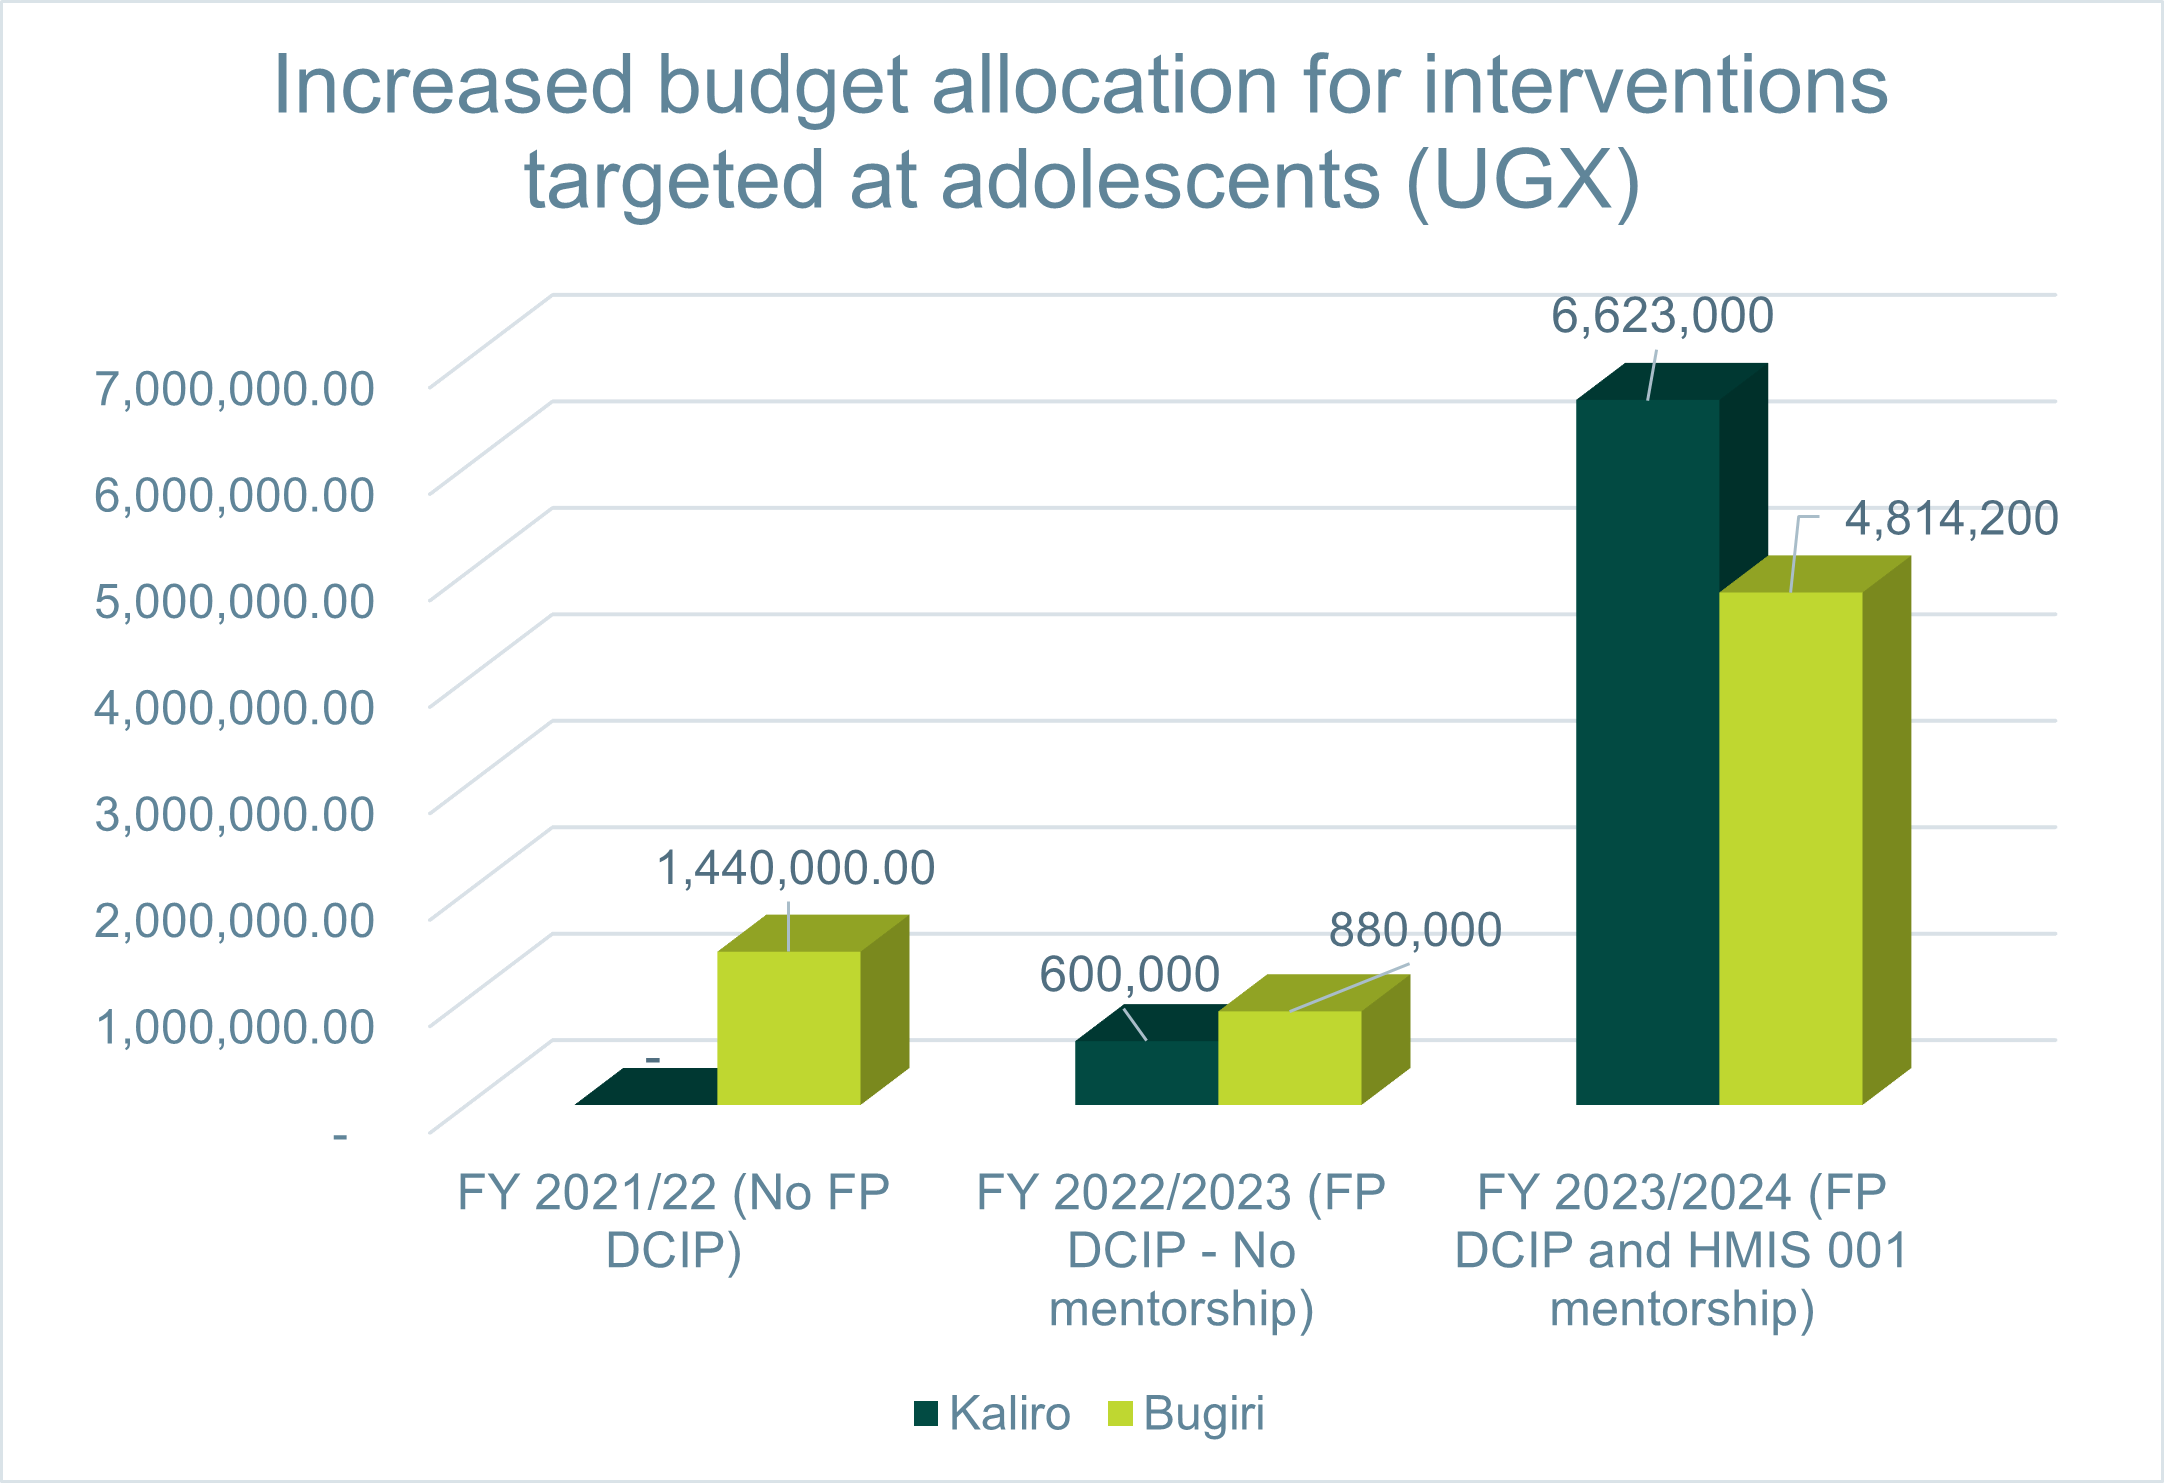 Chart showing increased budget allocation for interventions targeted at adolescents (showing currency in UGX)